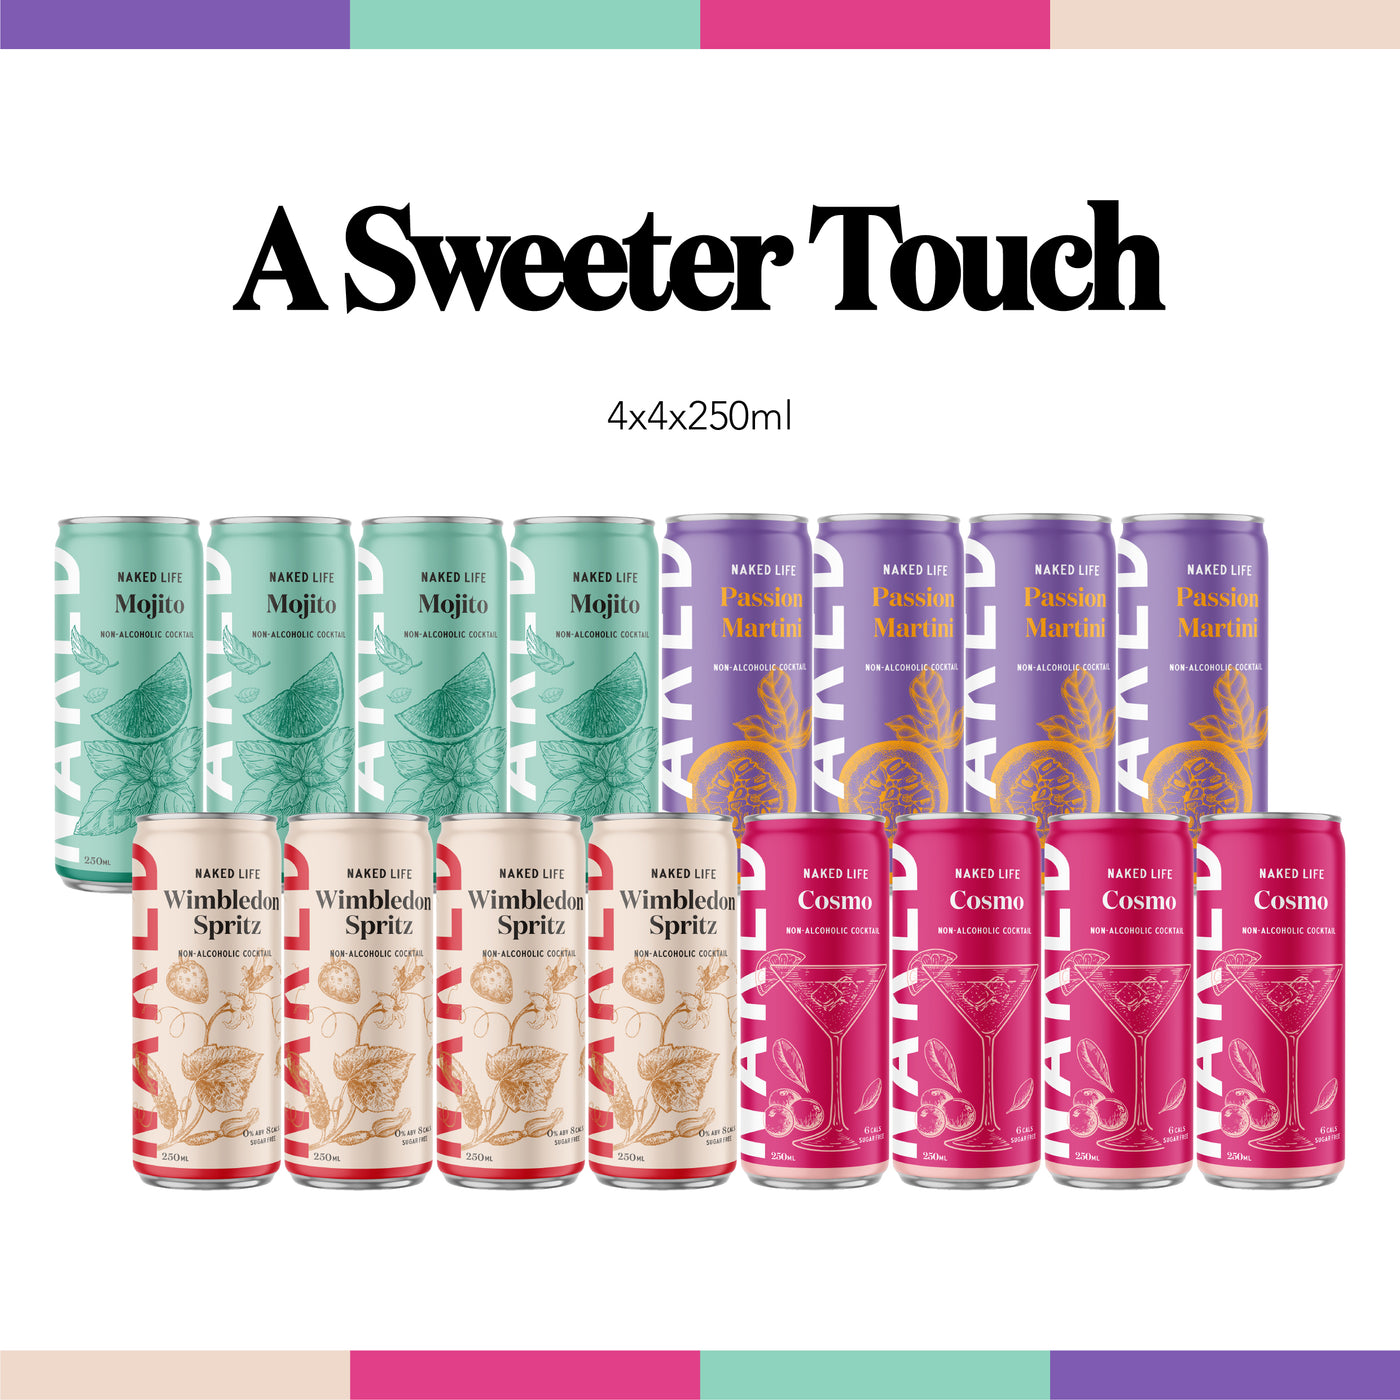 Naked Life Mixed Pack - A Sweeter Touch - 4 x 4 x 250ml Cans